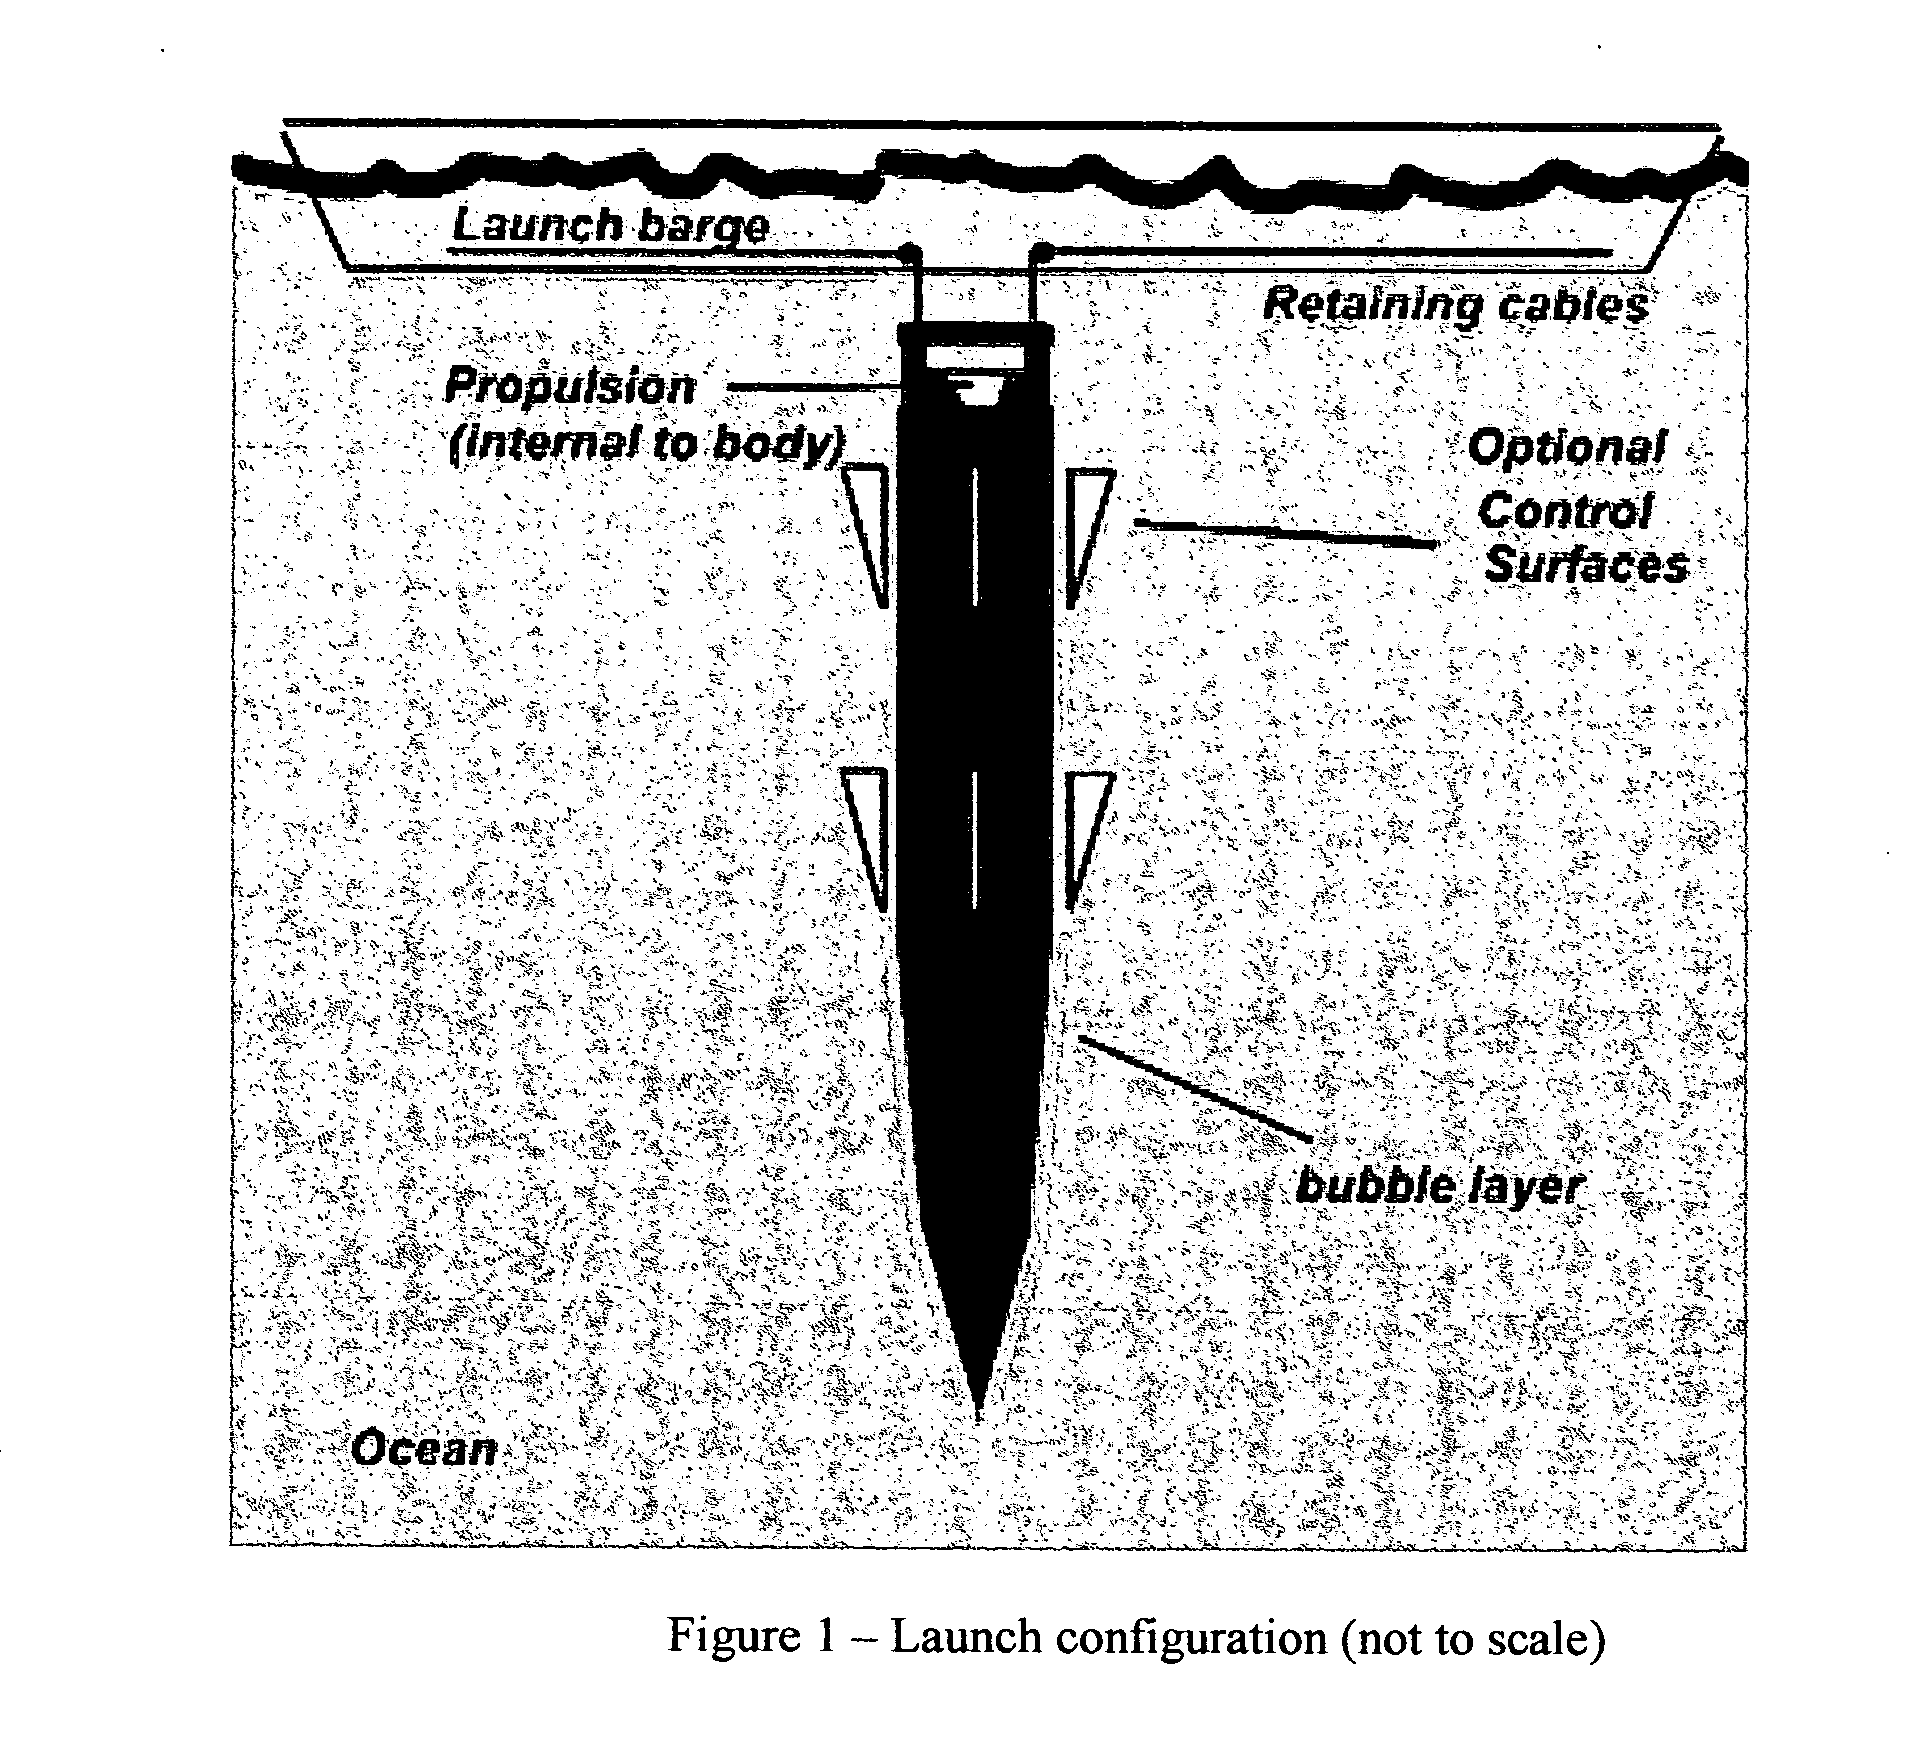 Apparatus for disposal of toxic and radioactive waste